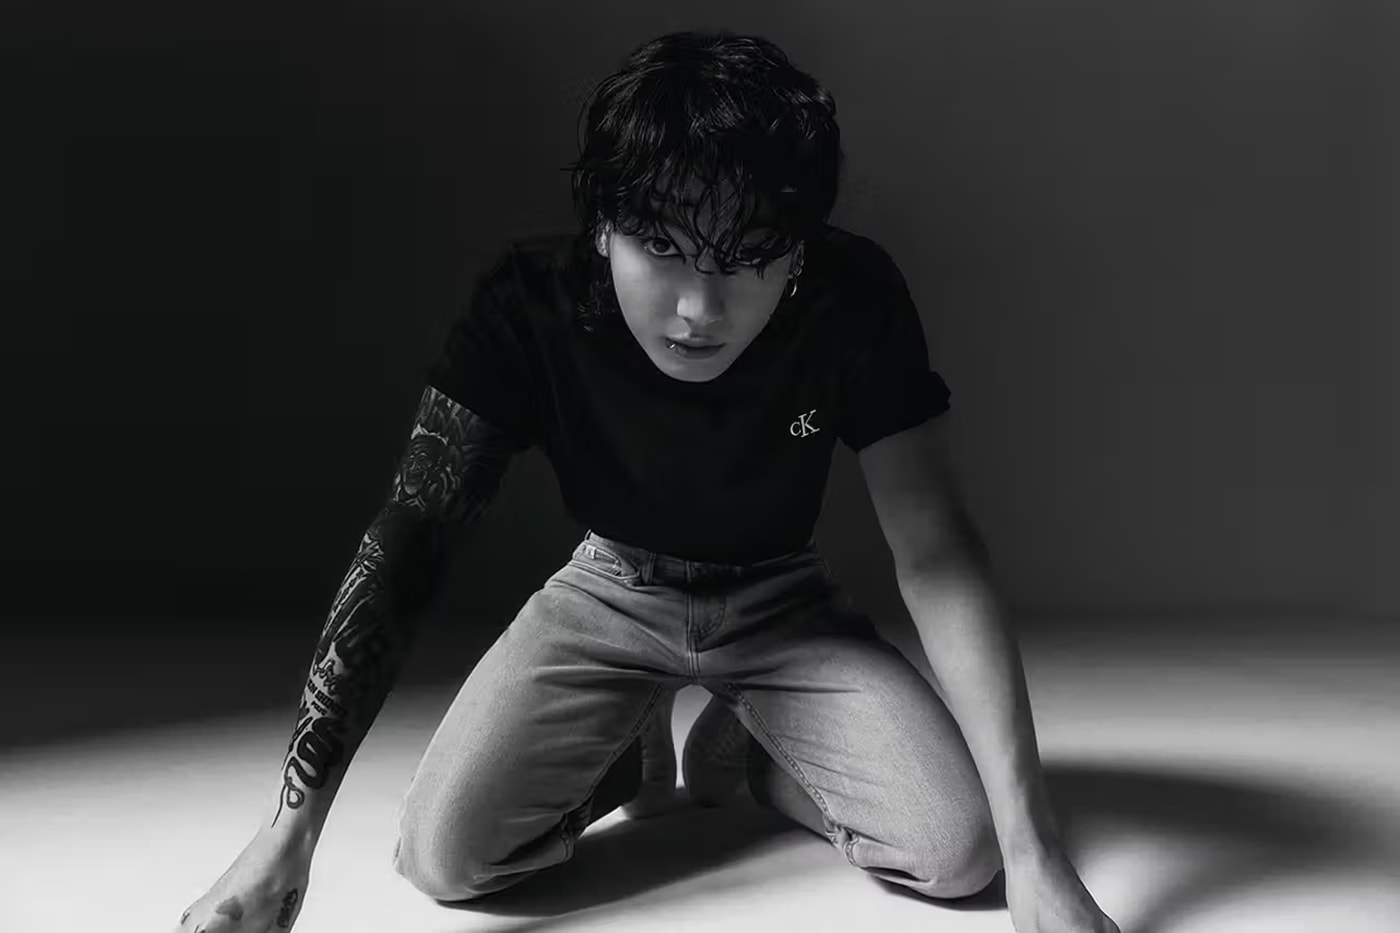 Calvin Klein Reveals New BTS' Jungkook Campaign Imagery